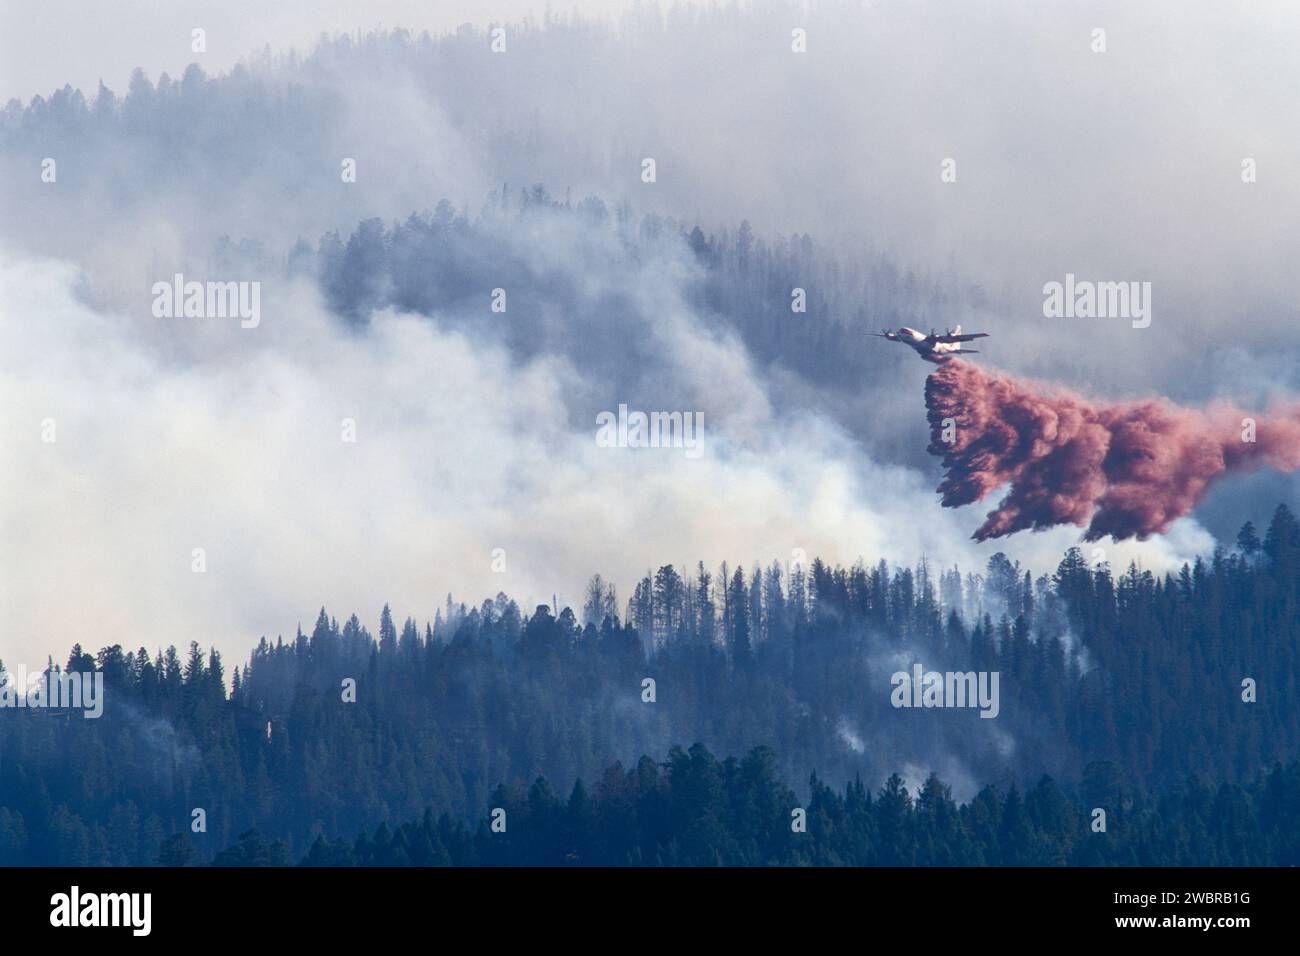 Bomber drops retardant on forest fire. Stock Photo